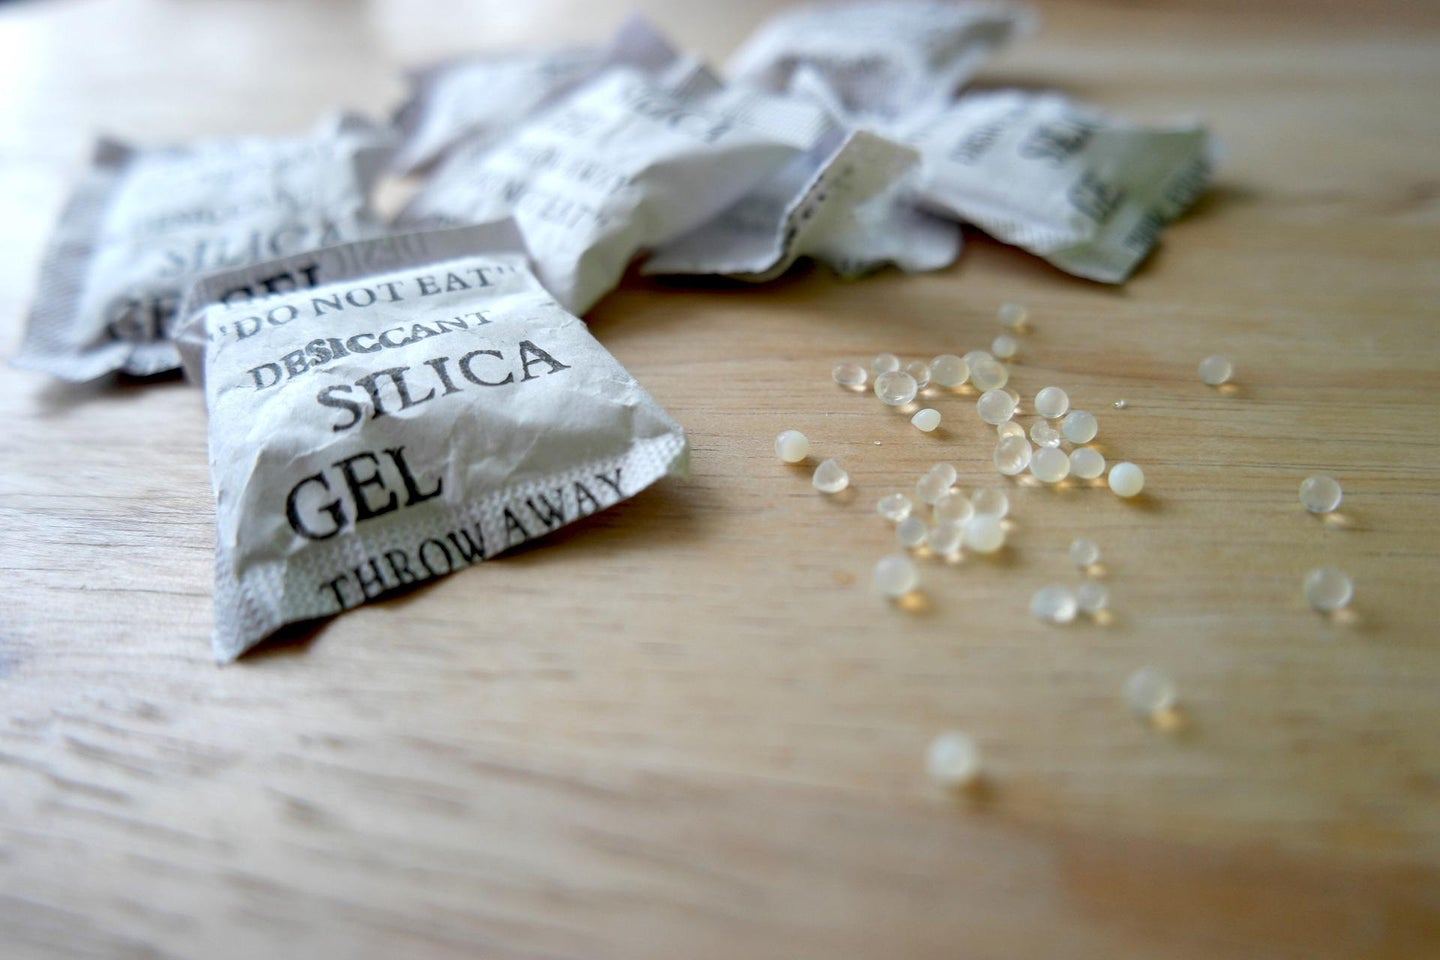 Opened silica gel packet on a wood countertop, ready for someone to find another use for them.